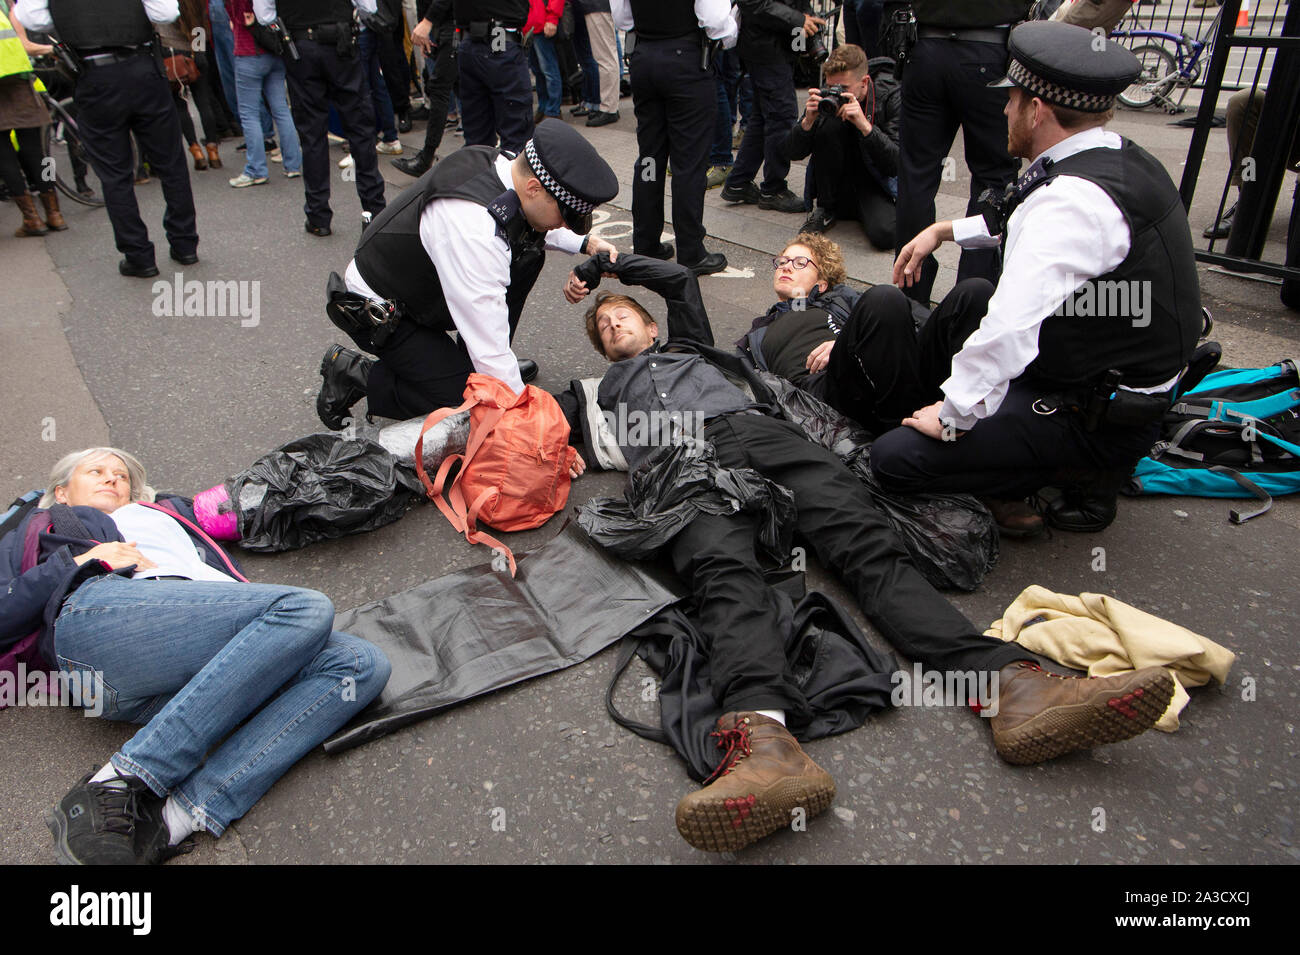 London, Britain. 7th Oct, 2019. Police officers arrest protesters in London, Britain, Oct. 7, 2019. London police confirmed 21 arrests so far in the central part of the British capital on Monday morning at the start of two weeks of protests by environmental campaigners. Credit: Ray Tang/Xinhua/Alamy Live News Stock Photo